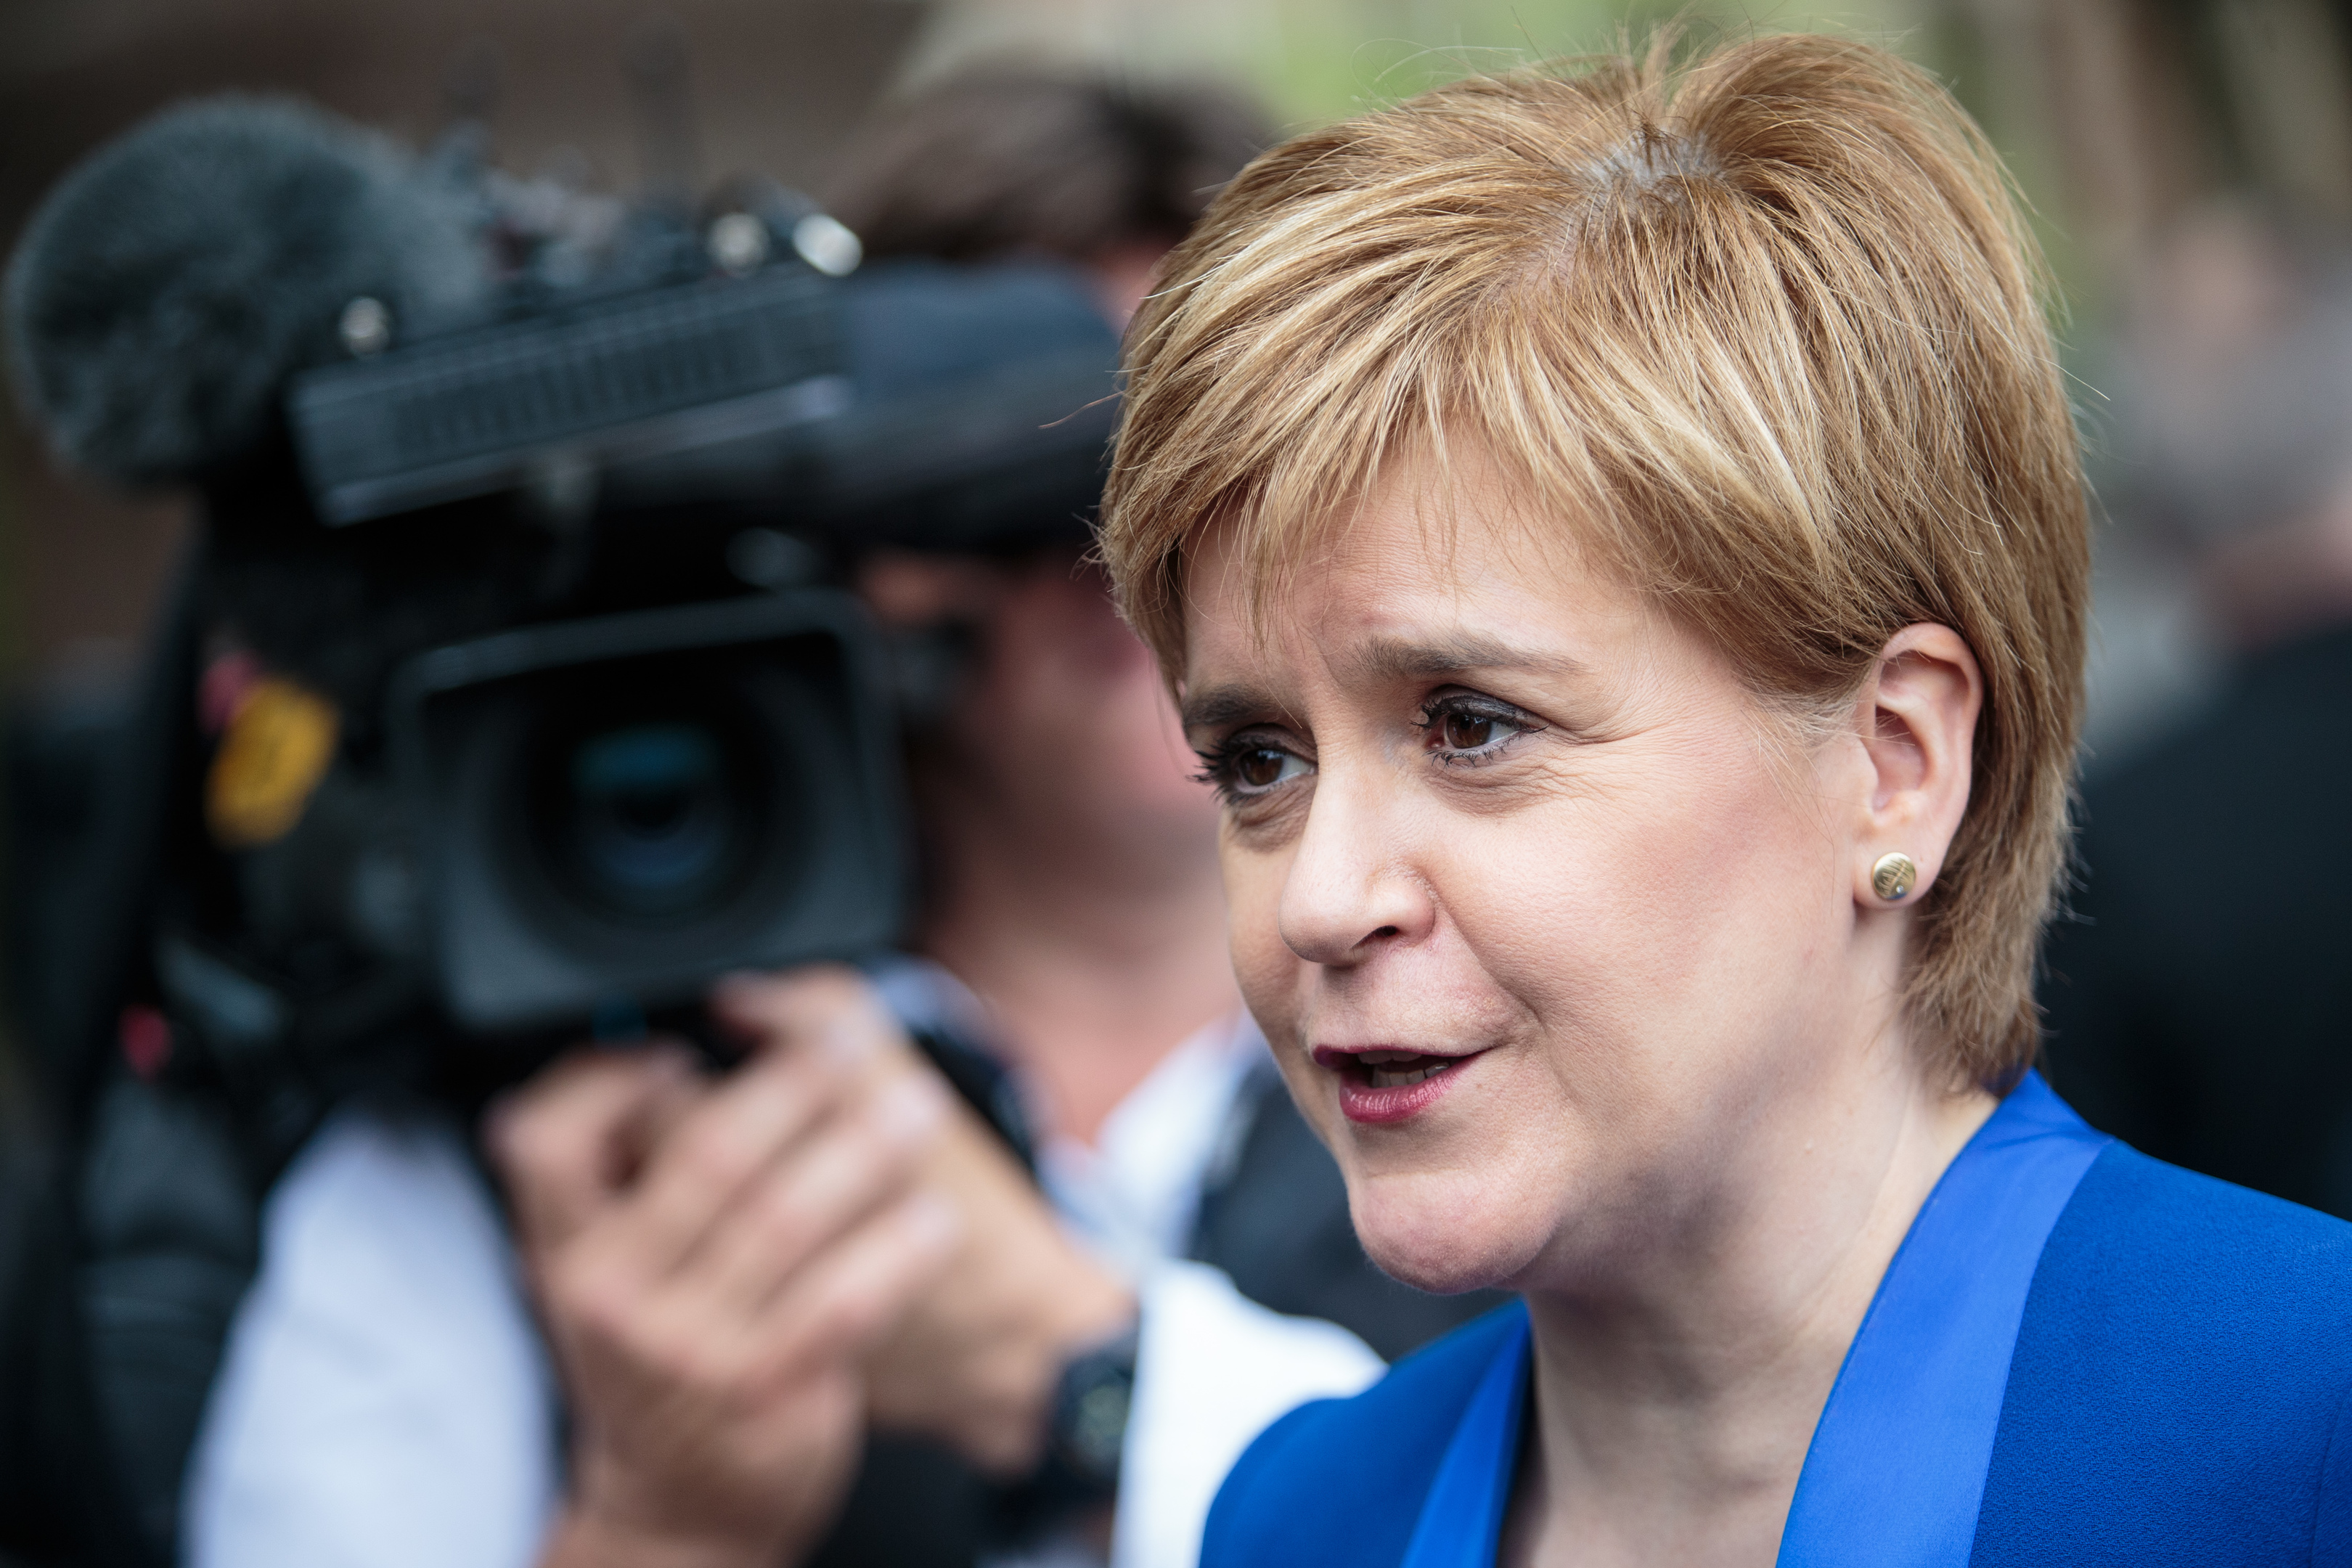 Scottish National Party Leader Nicola Sturgeon speaks to the media in Parliament Sq (Jack Taylor/Getty Images)